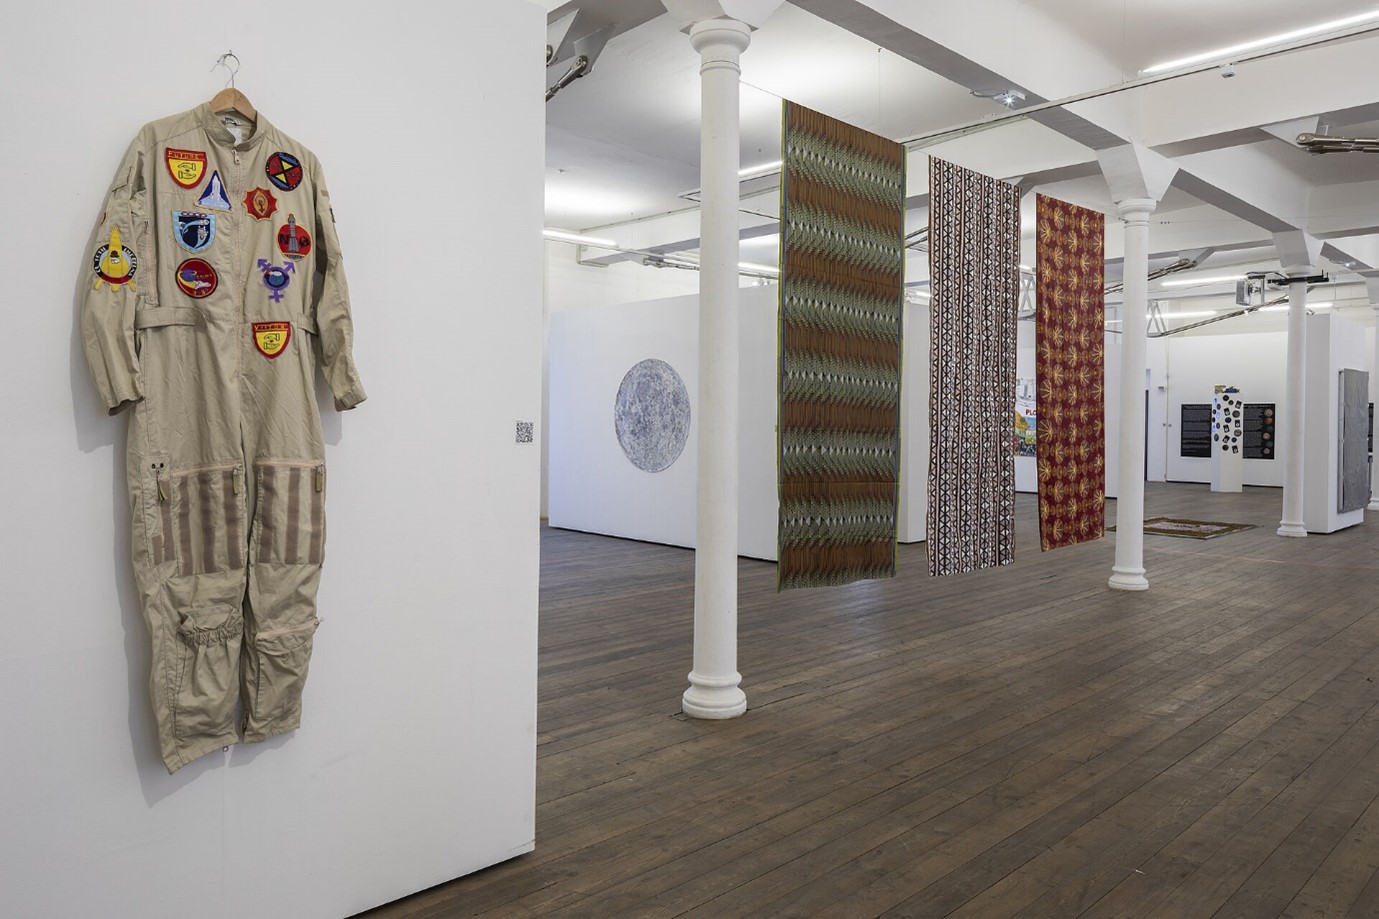 Exhibition at a gallery with a pale badged bodysuit costume on the left and three patterned coloured sheets hanging on the right